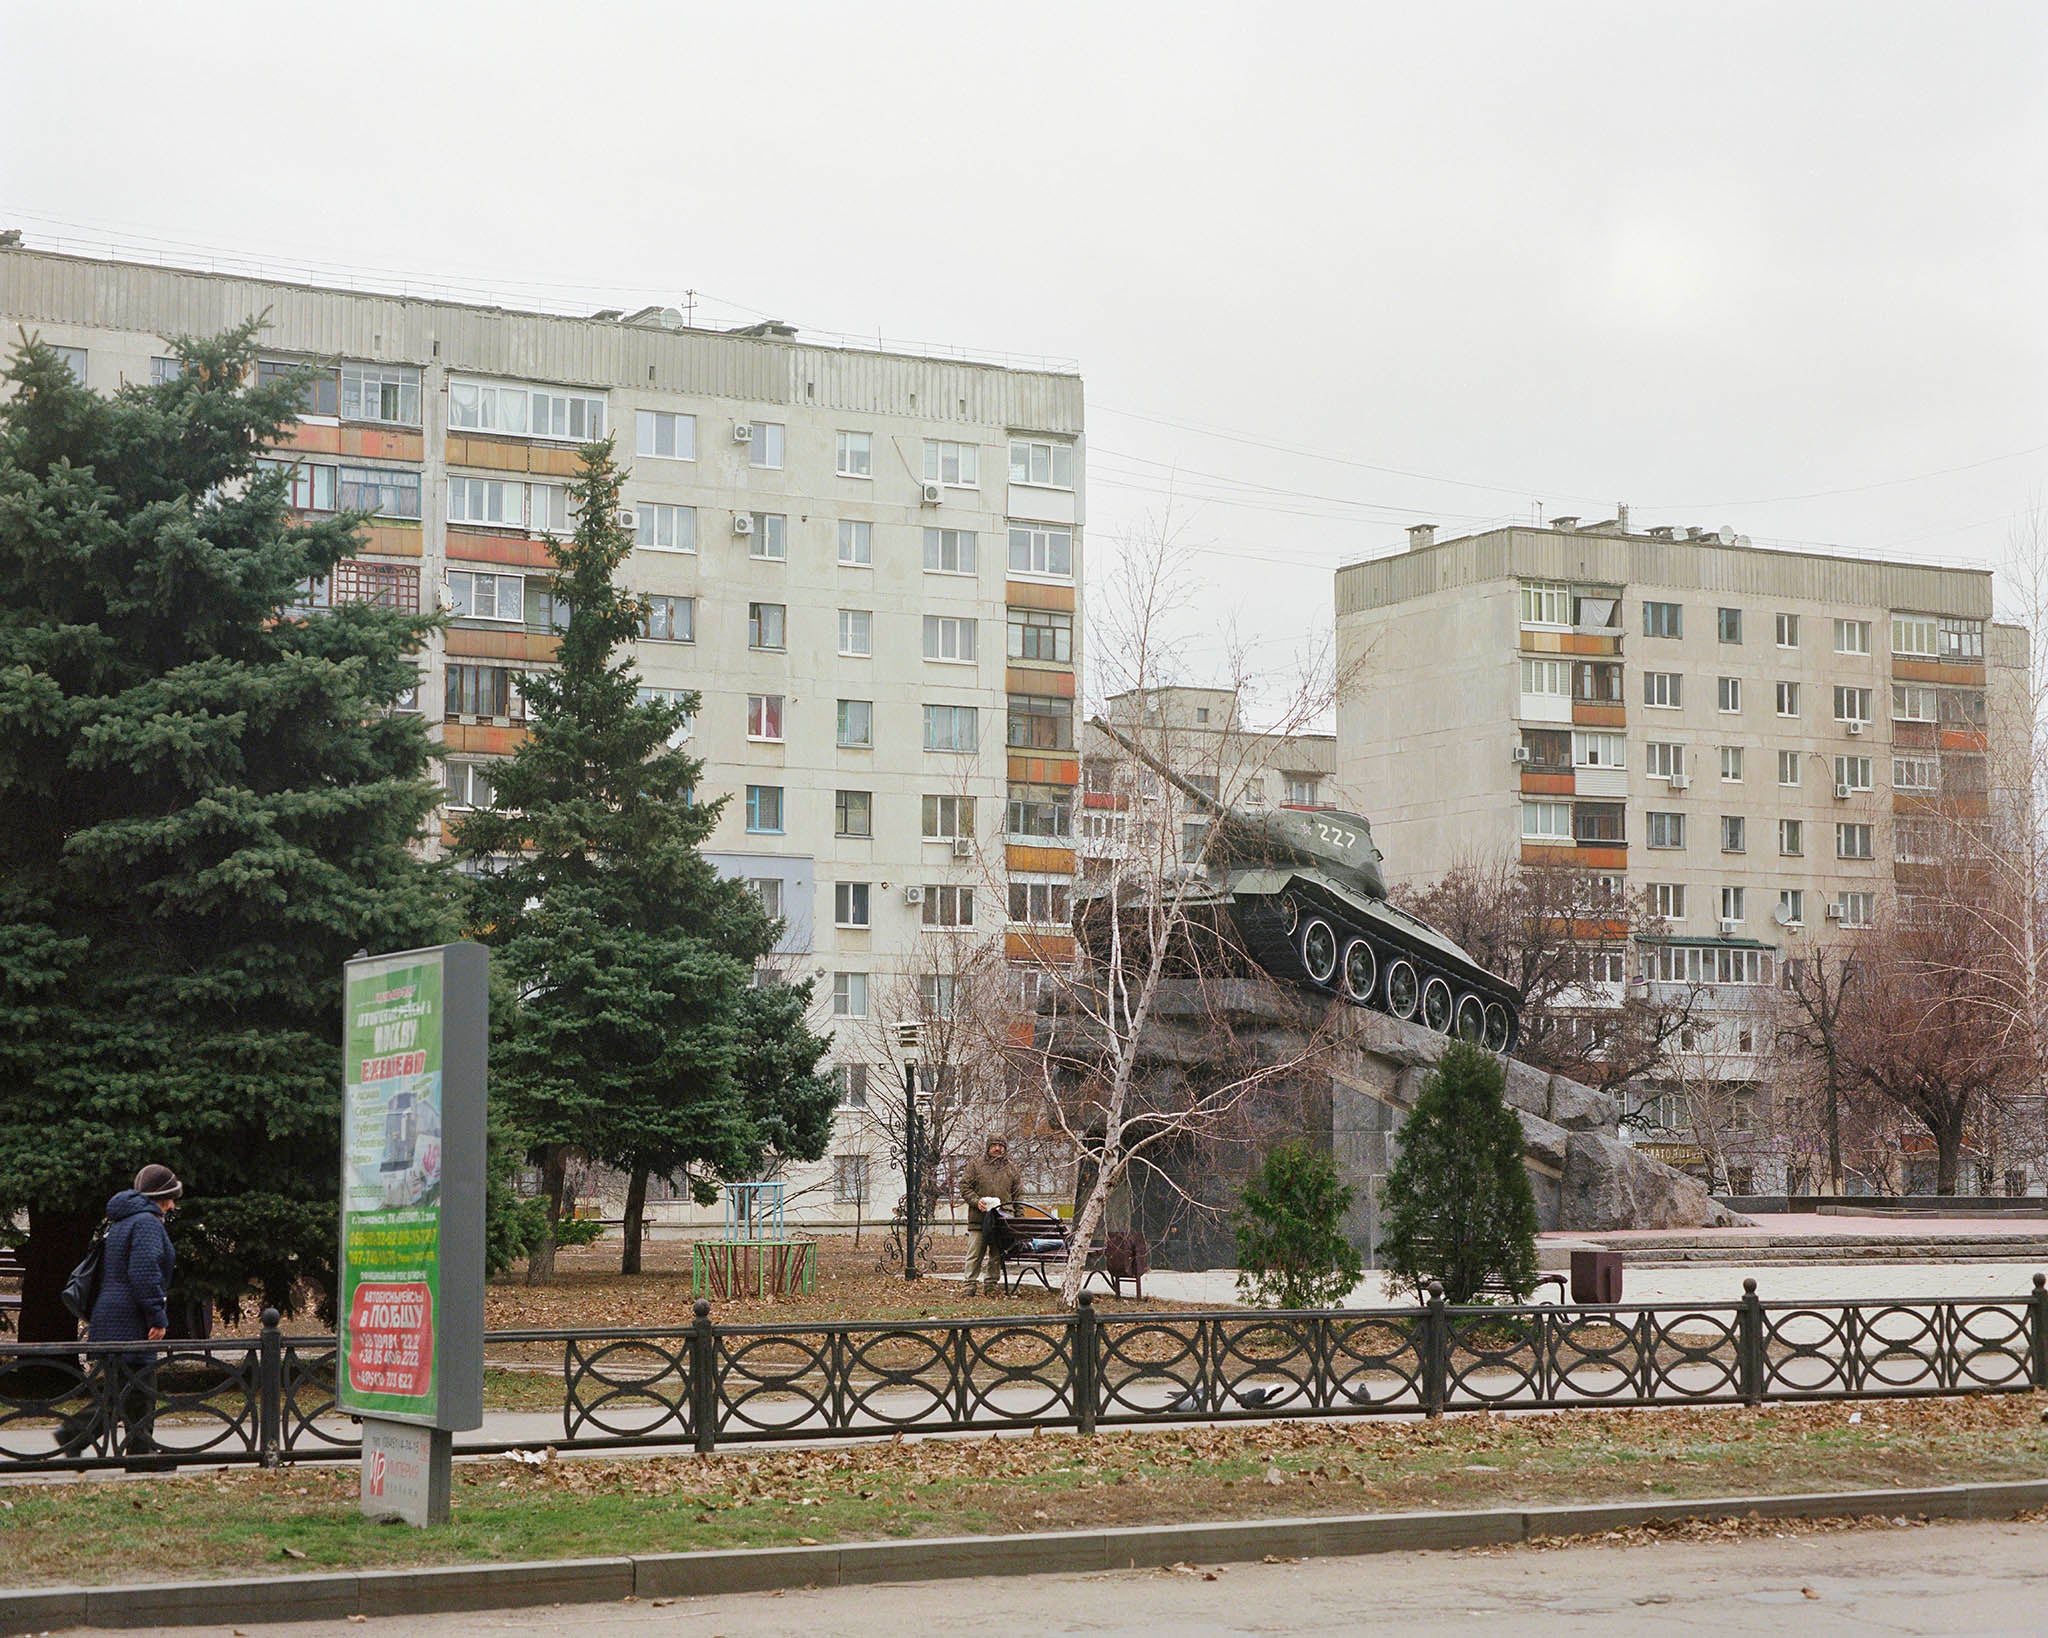 Monument to the Second World War, Luhansk, 2019